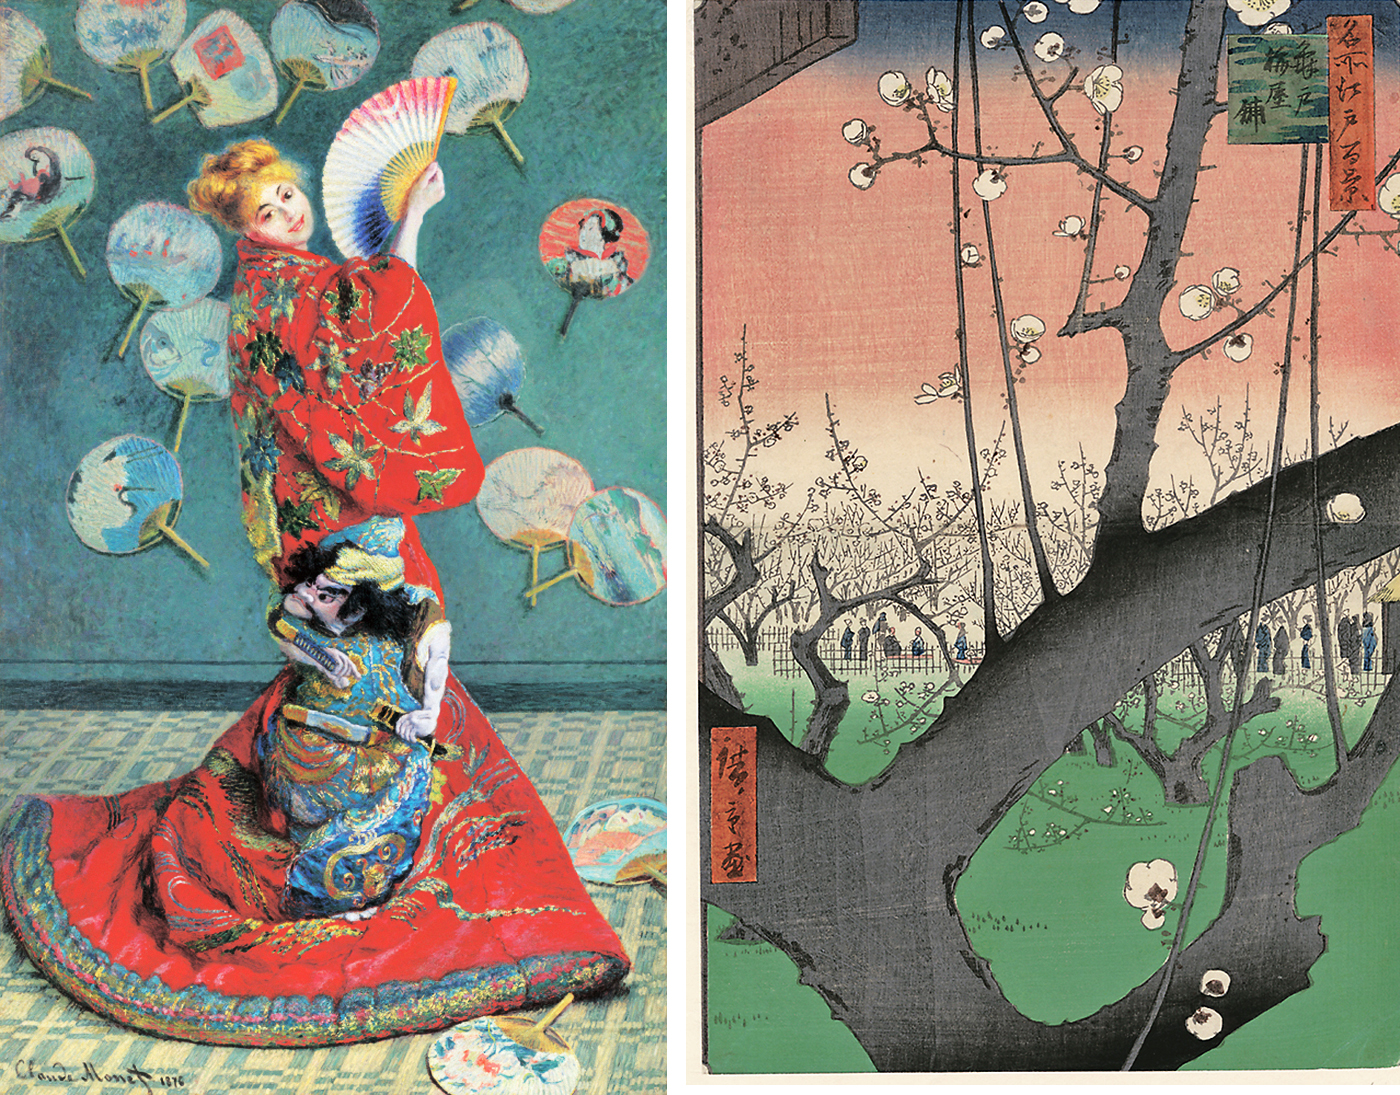 Left: Claude Monet's 'La Japonaise (Camille Monet in Japanese Costume)' (1876); Right: Utagawa Hiroshige's 'Plum Estate, Kameido' from the series 'One Hundred Famous Views of Edo'  |  1951 PURCHASE FUND 56.147, &#169; 2014 MUSEUM OF FINE ARTS,BOSTON;  BEQUEST OF JOHN T. SPAULDING 48.548, &#169; 2014 MUSEUM OF FINE ARTS, BOSTON